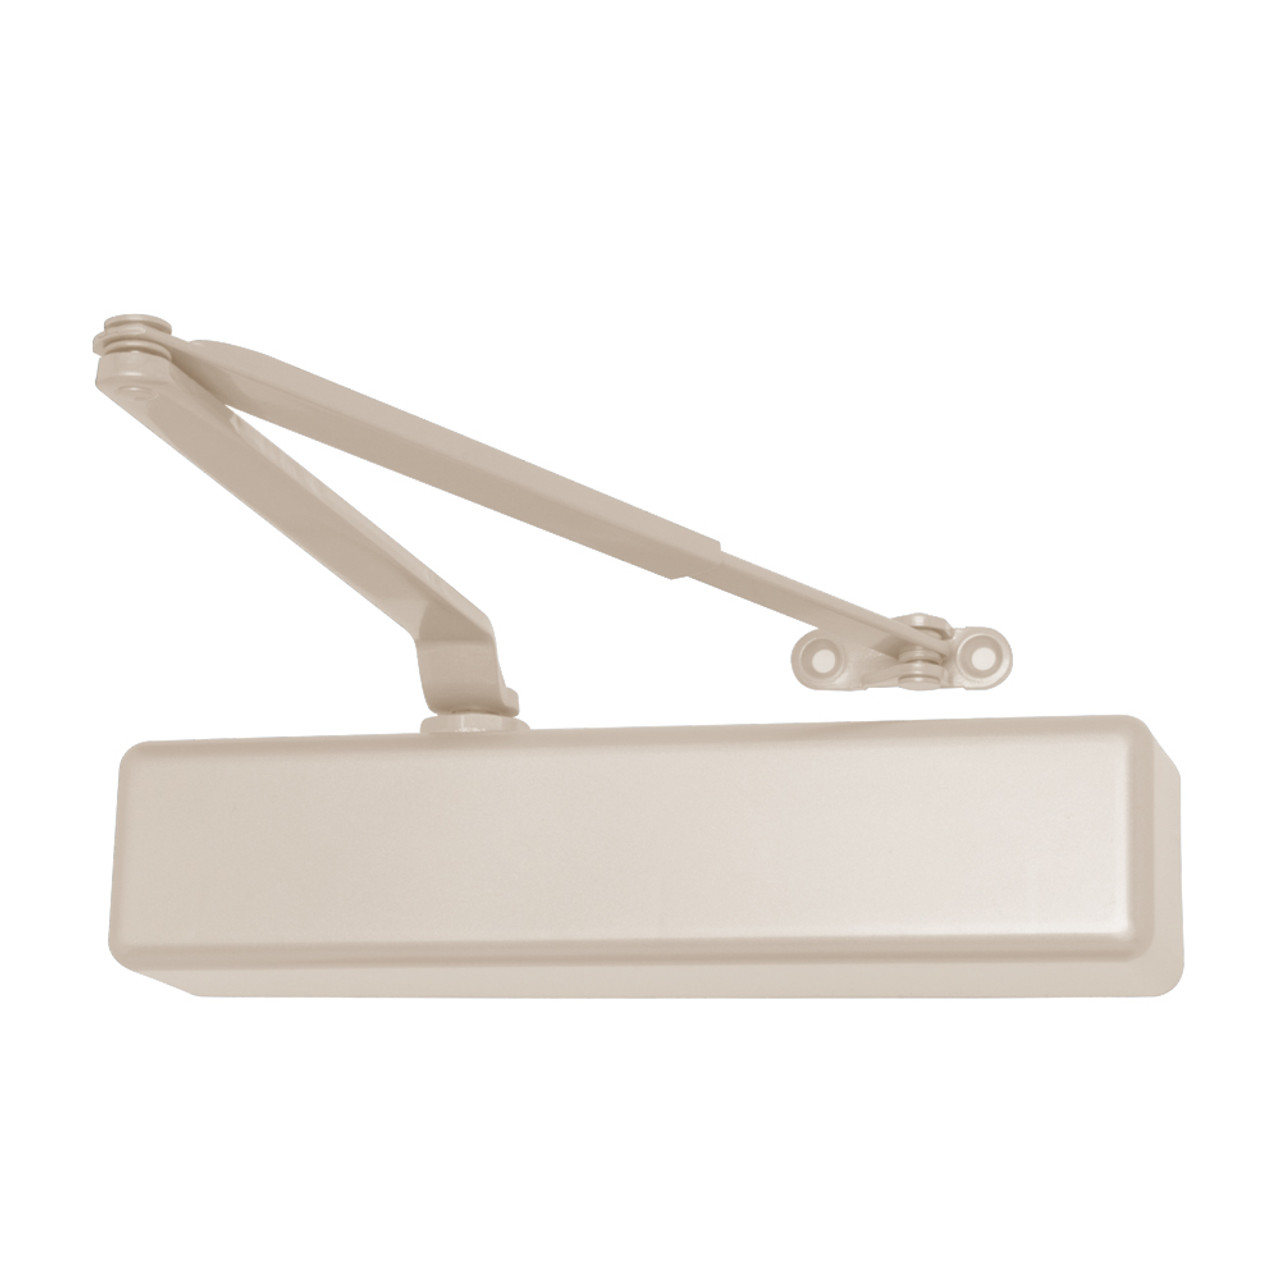 1461-HEDA-w-62G-RH-US15 LCN Door Closer with Hold Open Extra Duty Arm with Thick Hub Shoe in Satin Nickel Finish